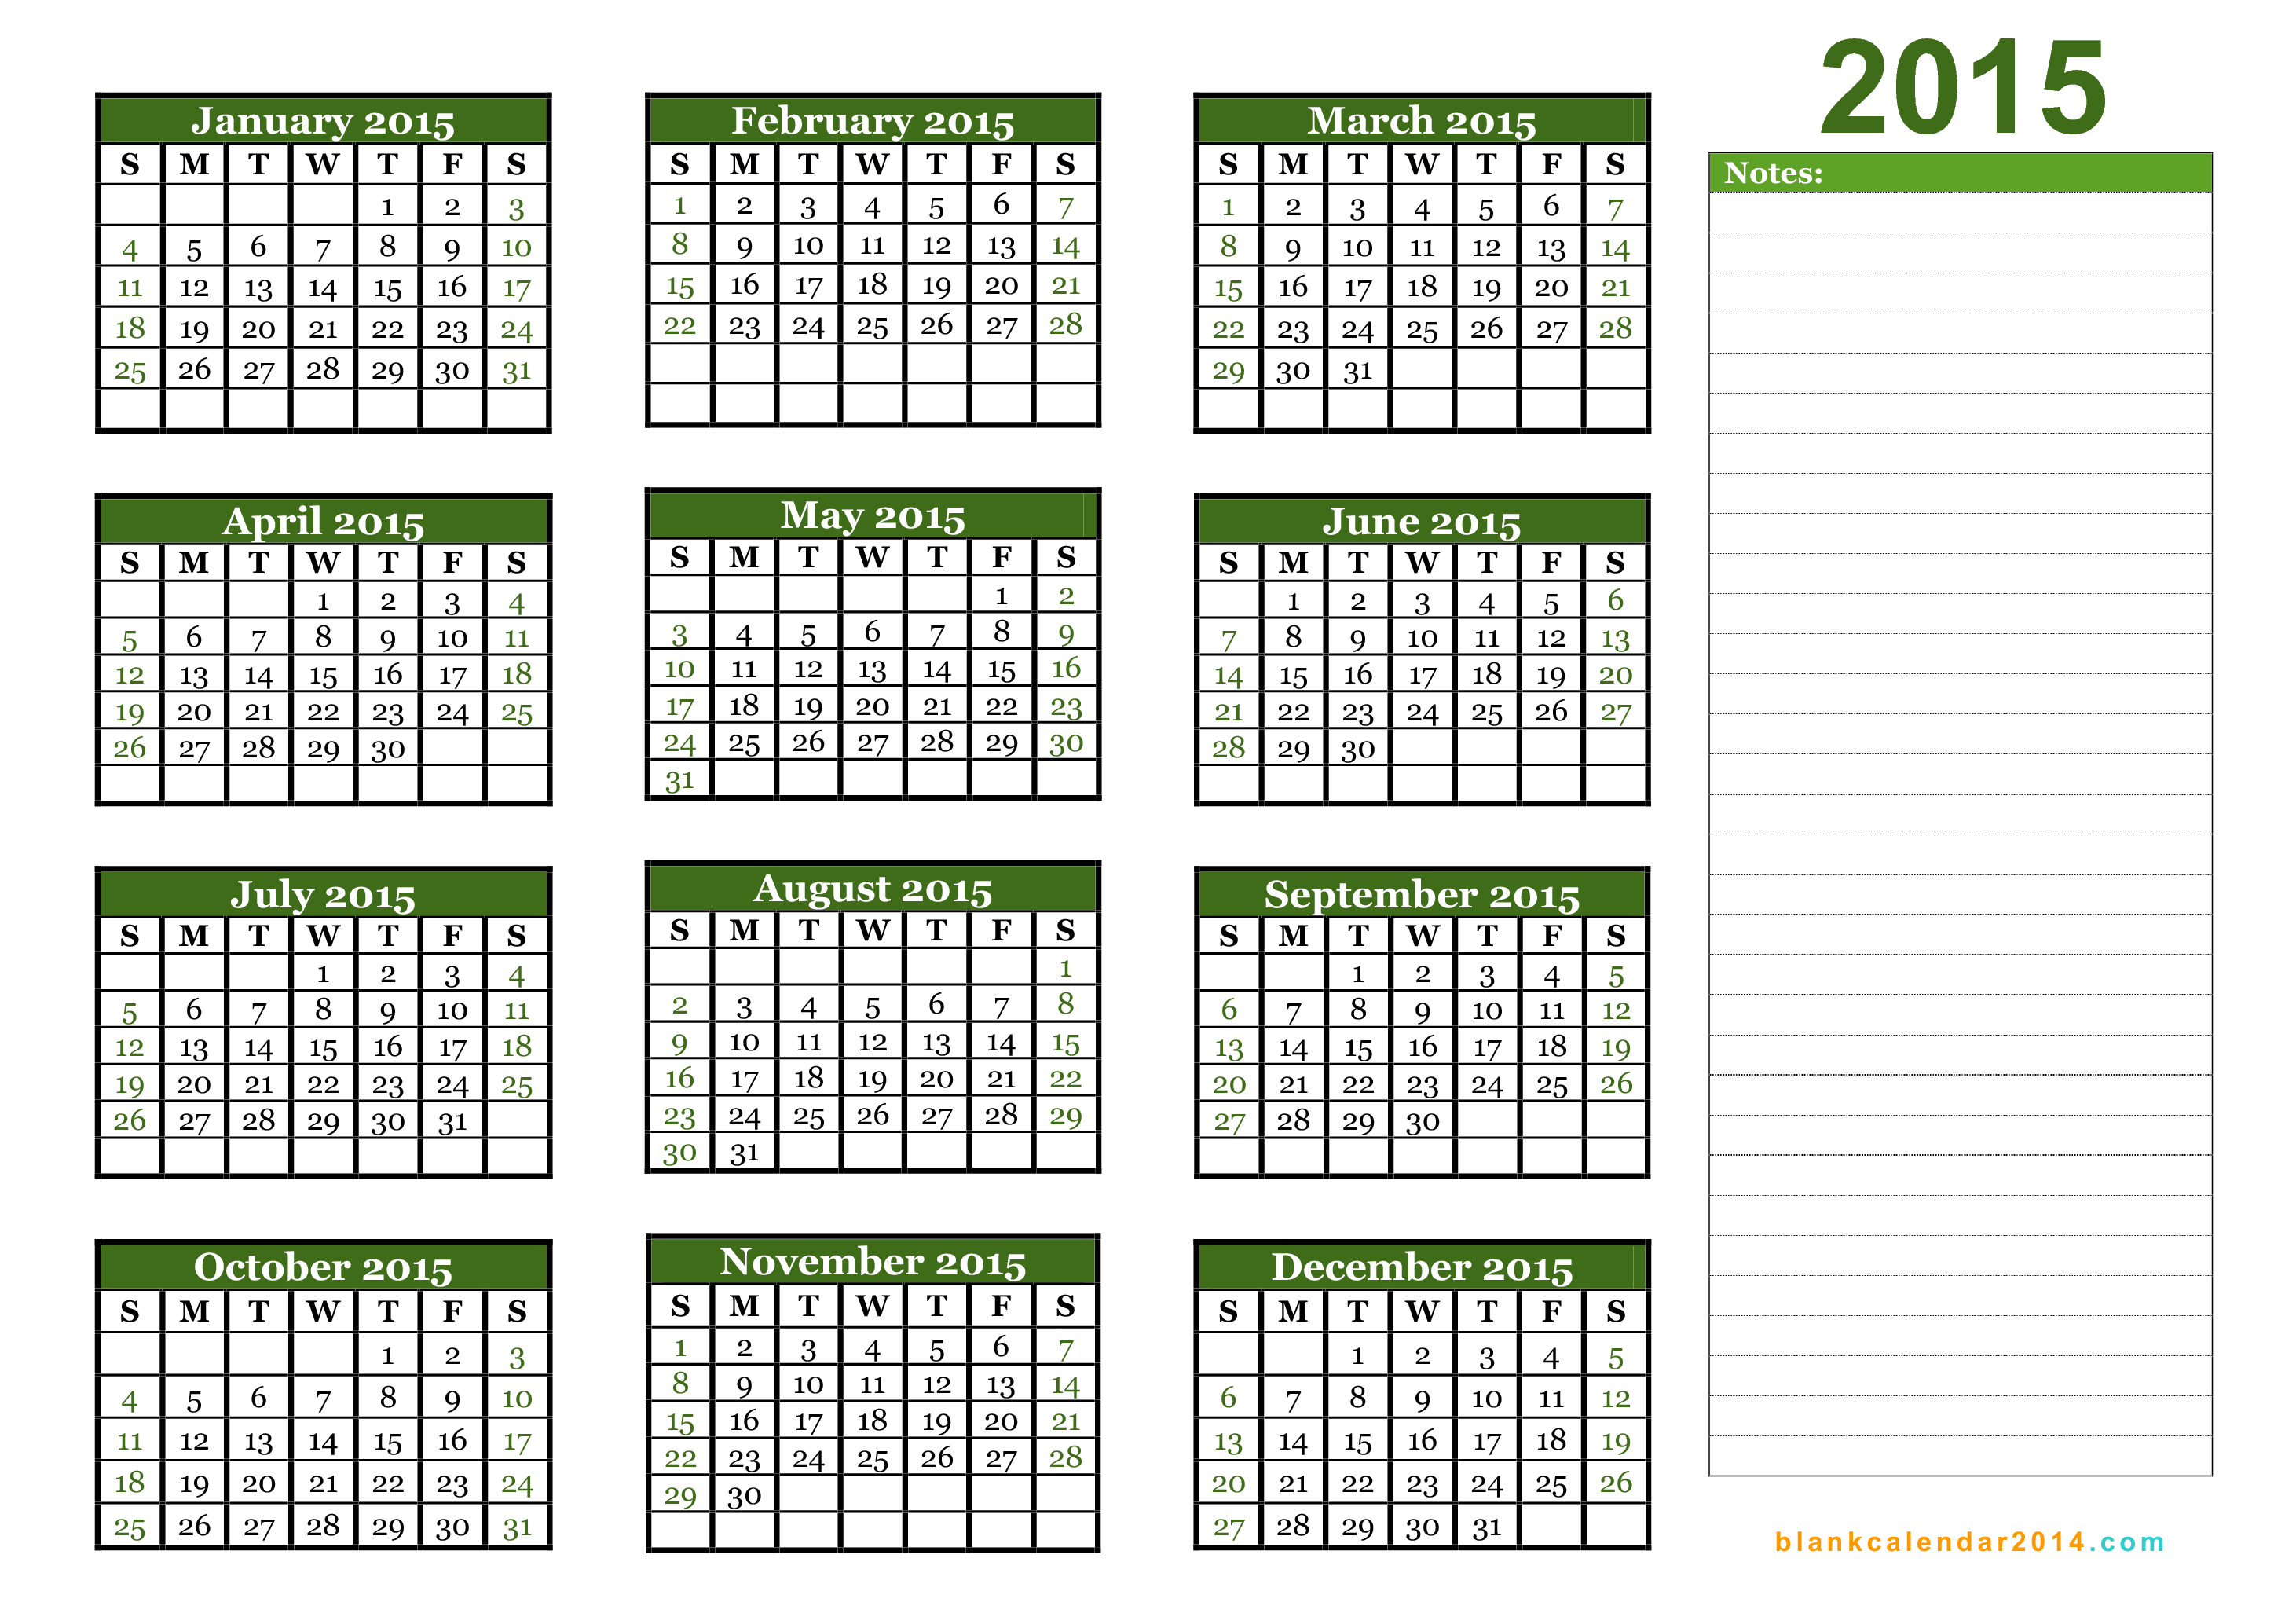 5-best-images-of-2015-yearly-calendar-printable-2015-calendar-free